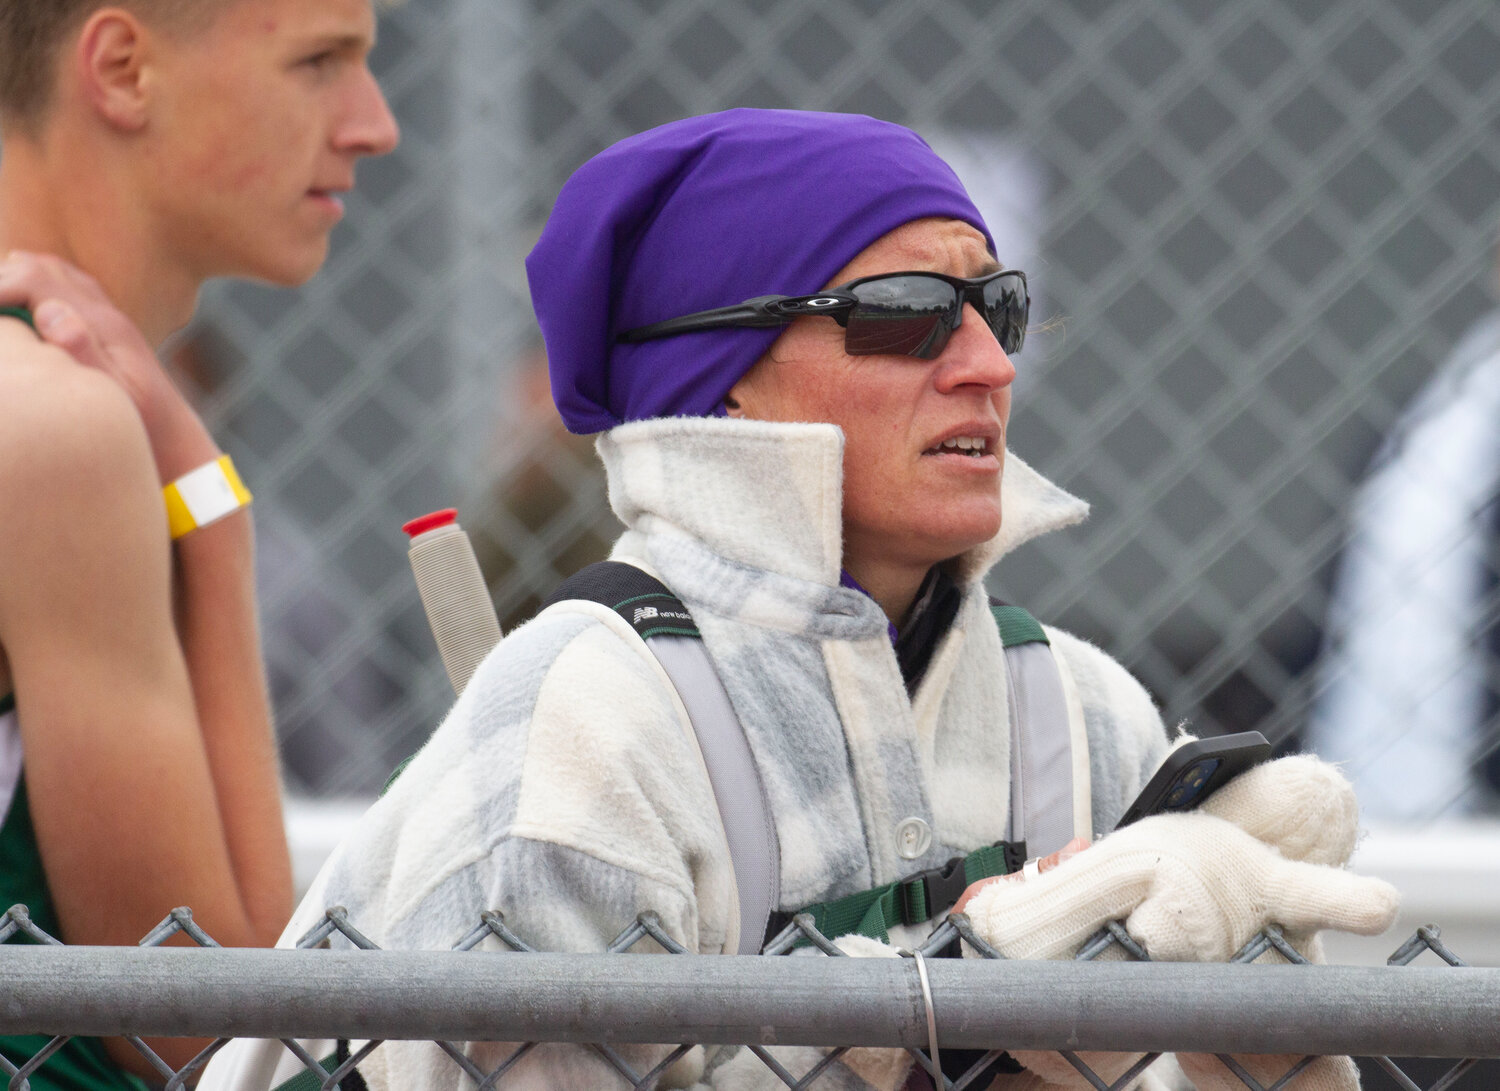 Coach Renae Cicchinelli looks on during the meet.